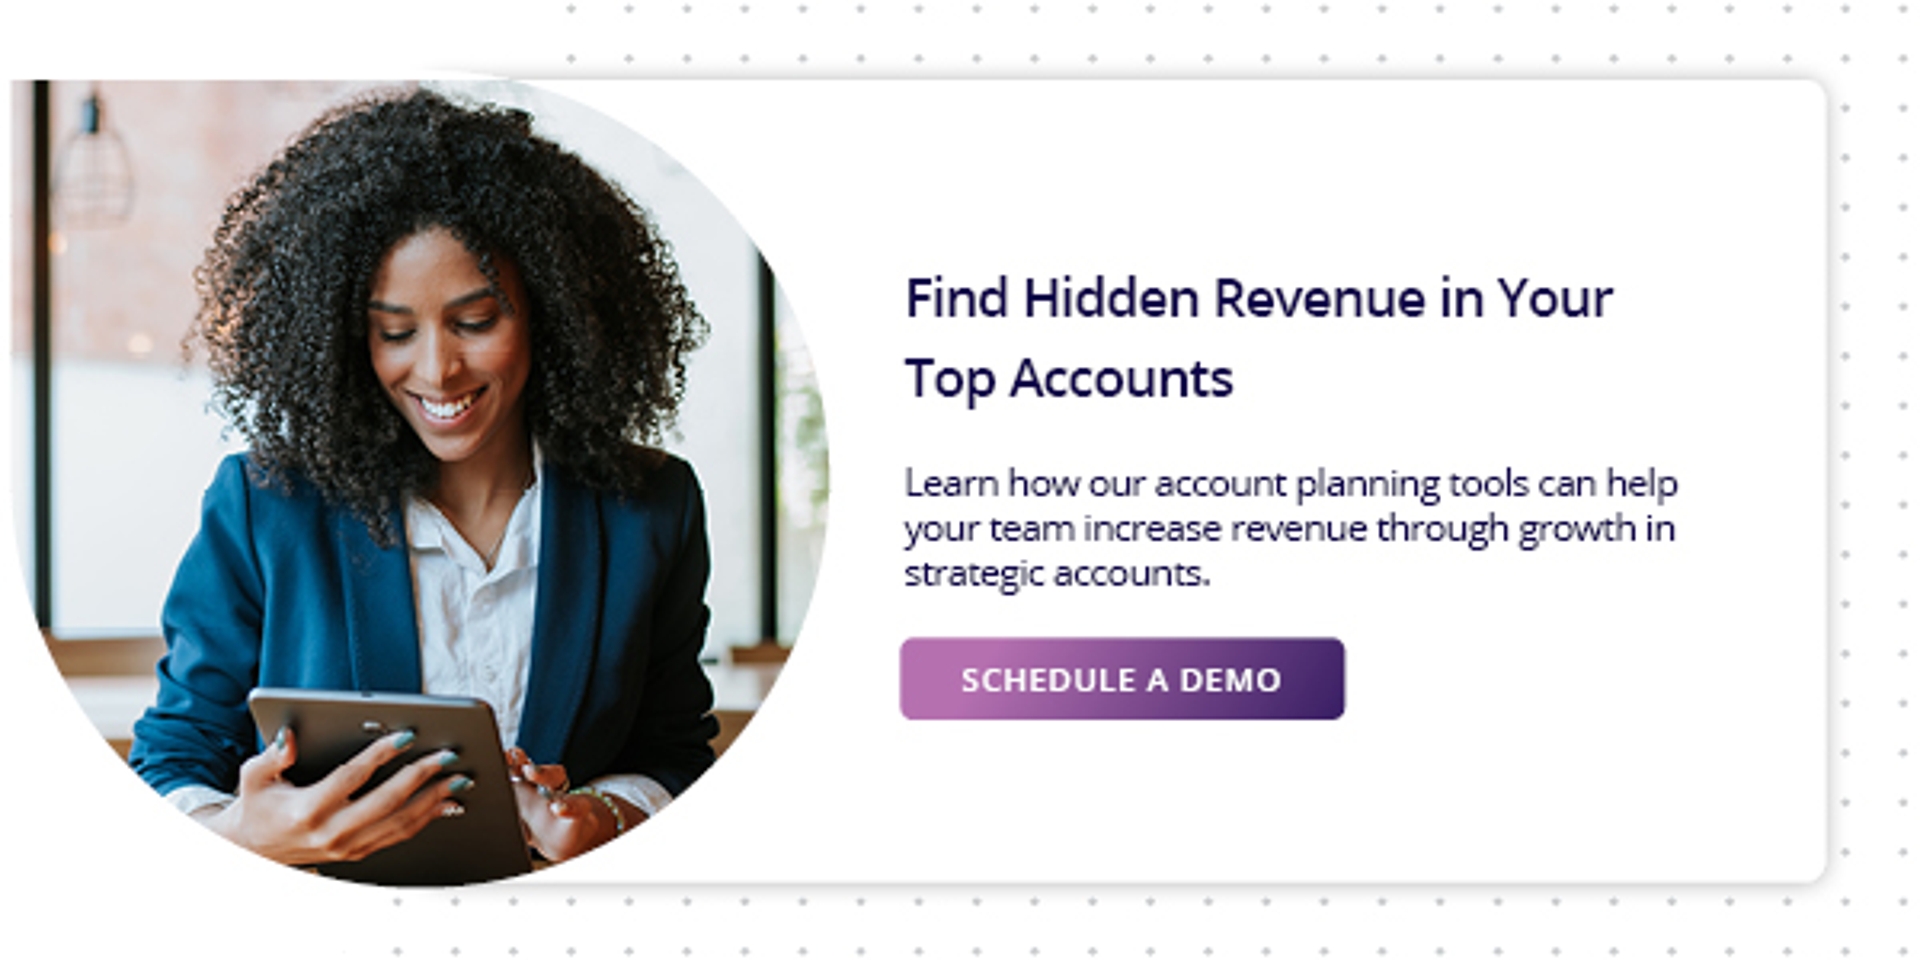 click here to schedule an account planning tools demo